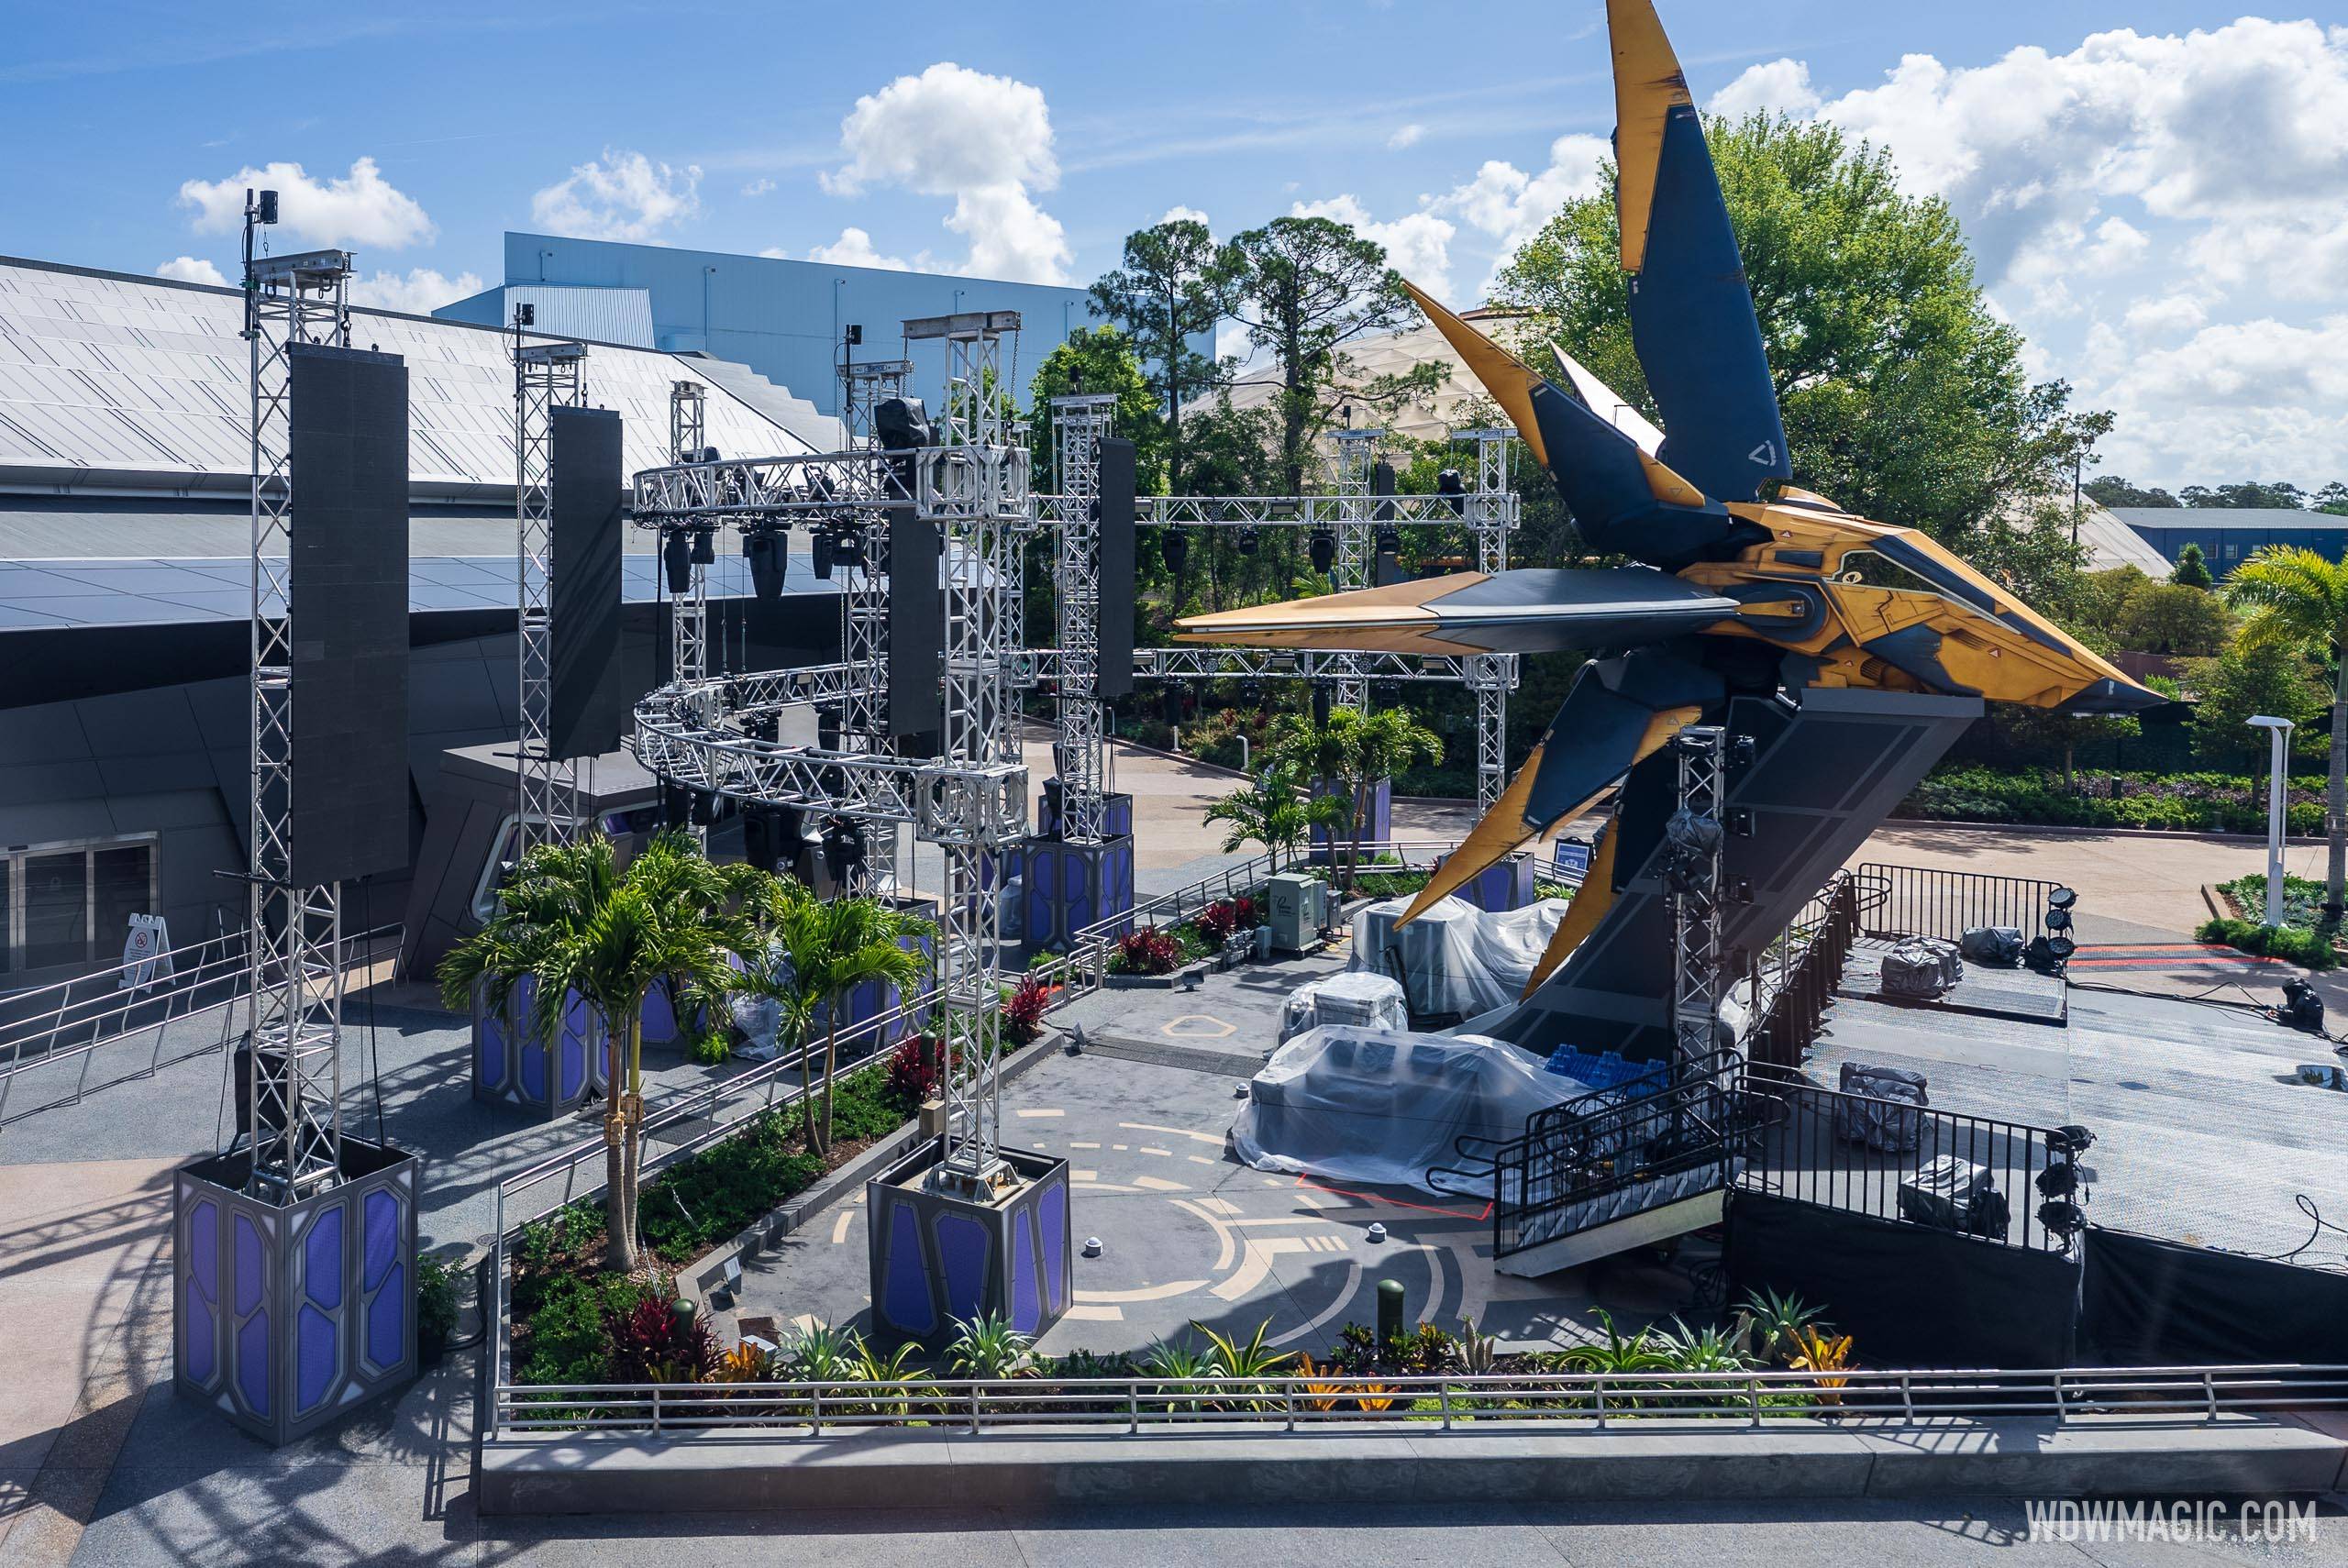 Media event stage setup at Guardians of the Galaxy Cosmic Rewind - May 2